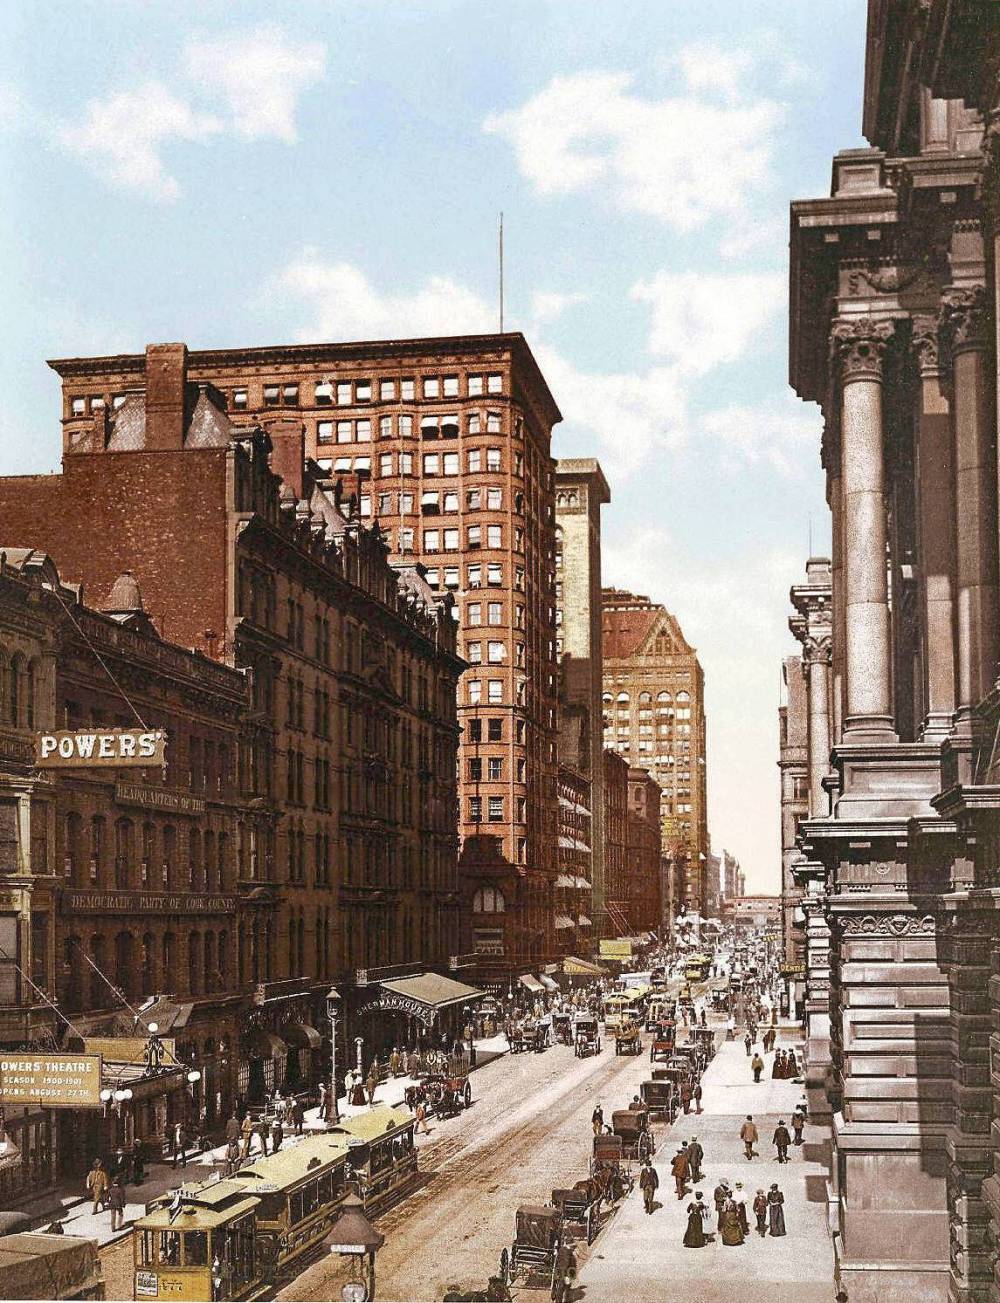 A PHOTO - CHICAGO - RANDOLPH STREET - AERIAL LOOKING E TOWARDS STATE - POWERS THEATRE - SHERMAN HOUSE HOTEL - CABLE CARS - WAGONS - TINTED - 1900